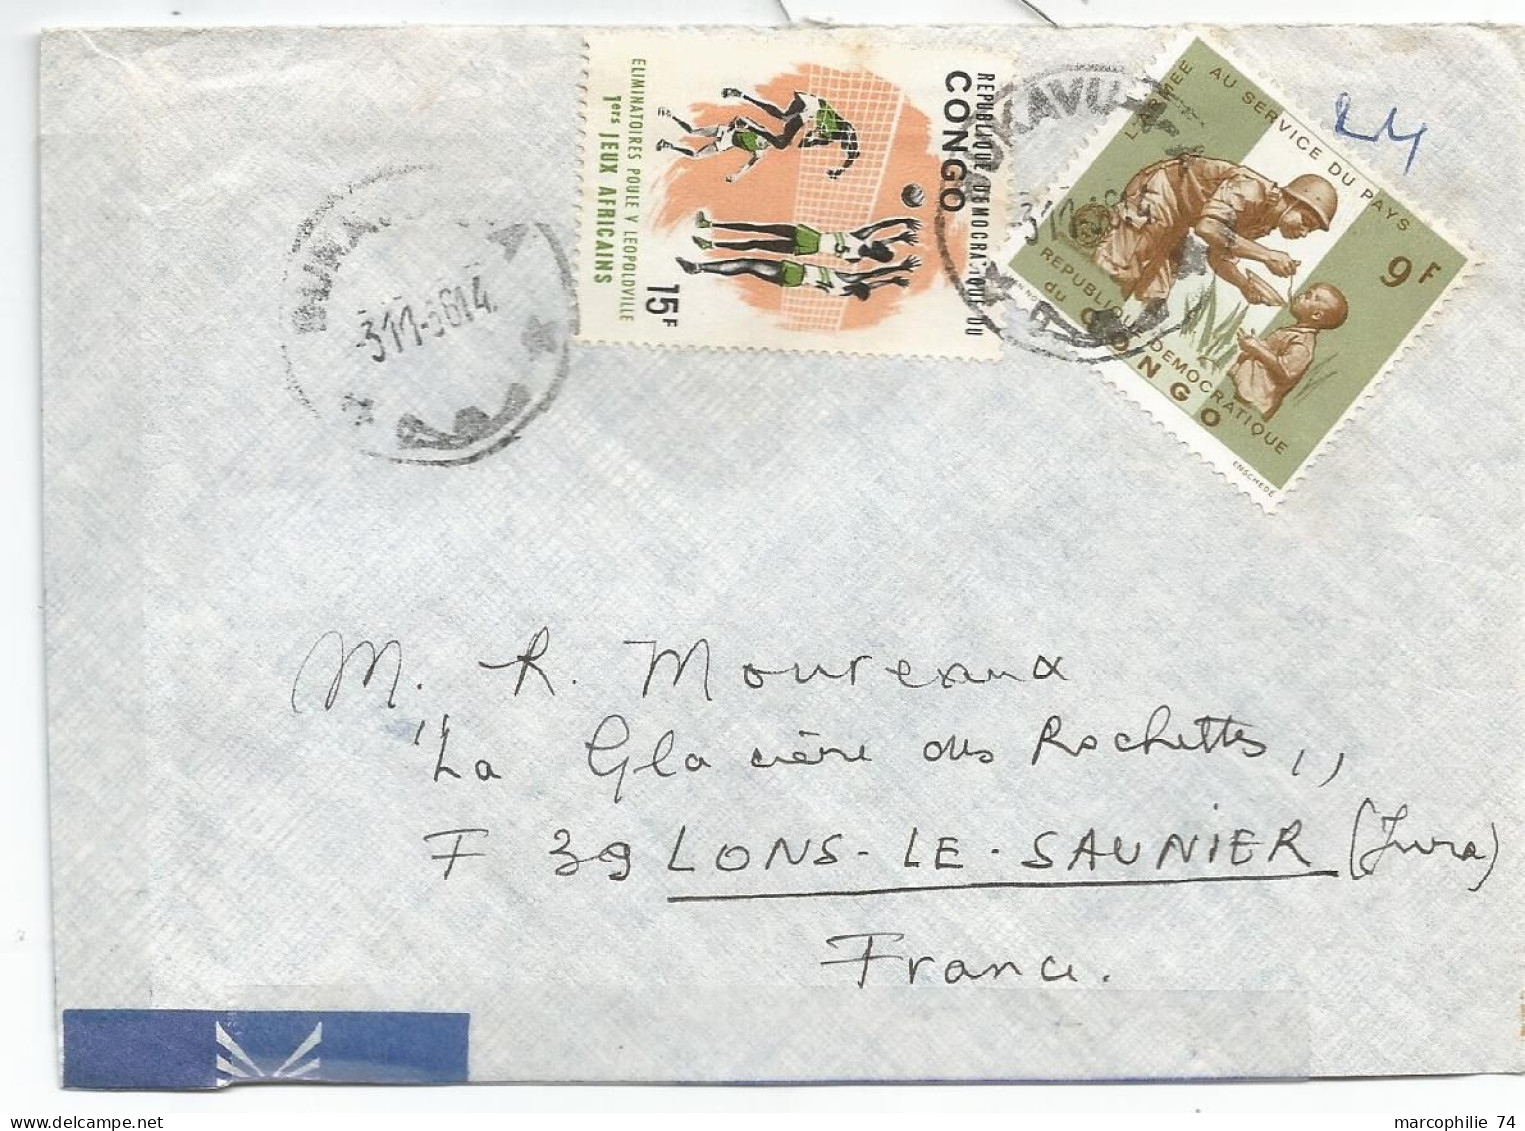 CONGO BELGE 9FR + 15FR VOLLEY BALL LETTRE COVER AVION BUKAVU 1964 TO FRANCE - Covers & Documents